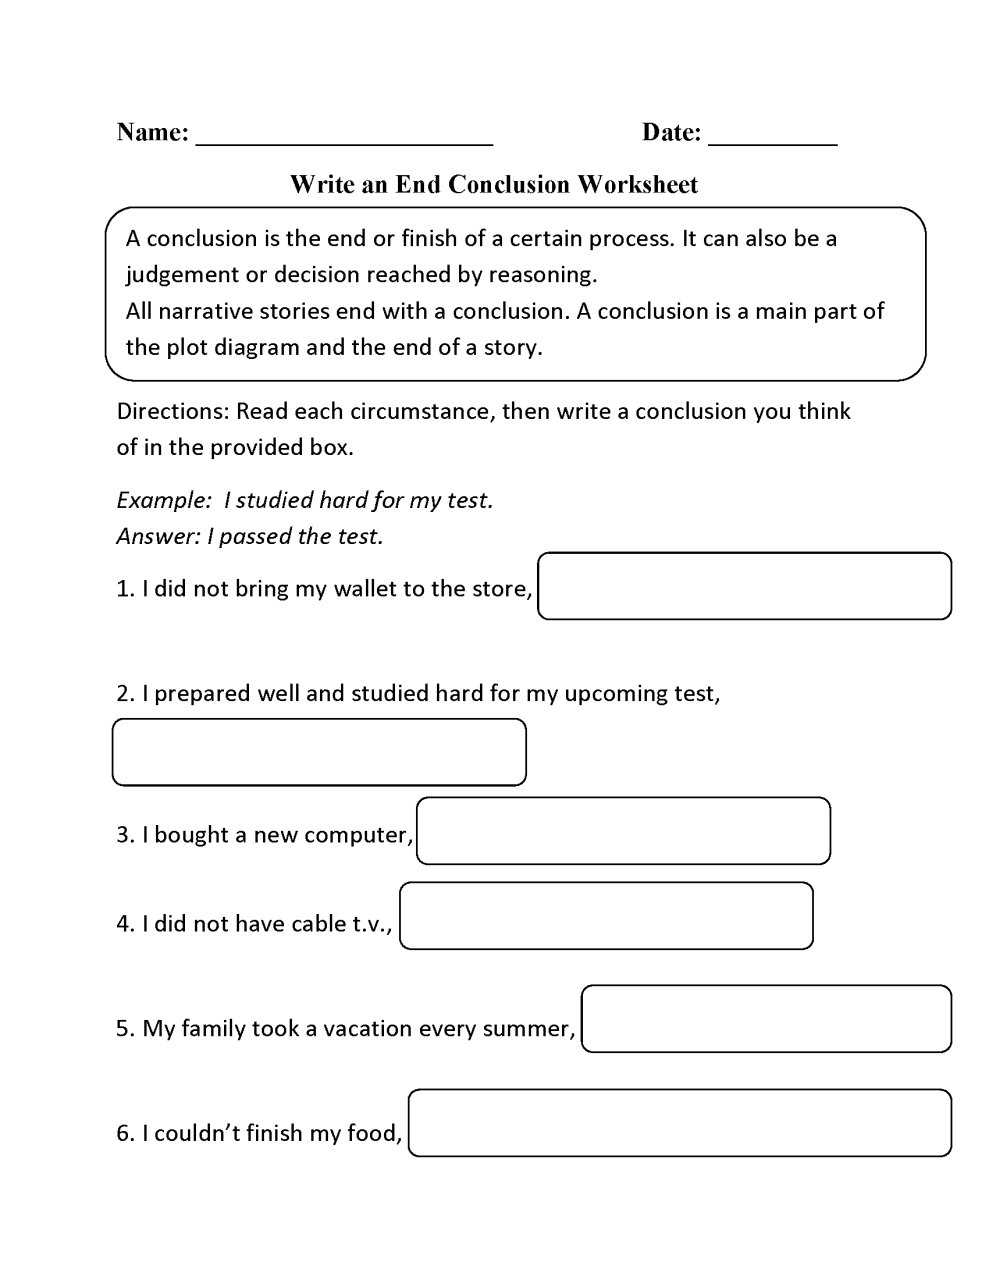 Drawing Conclusions Worksheets Pdf